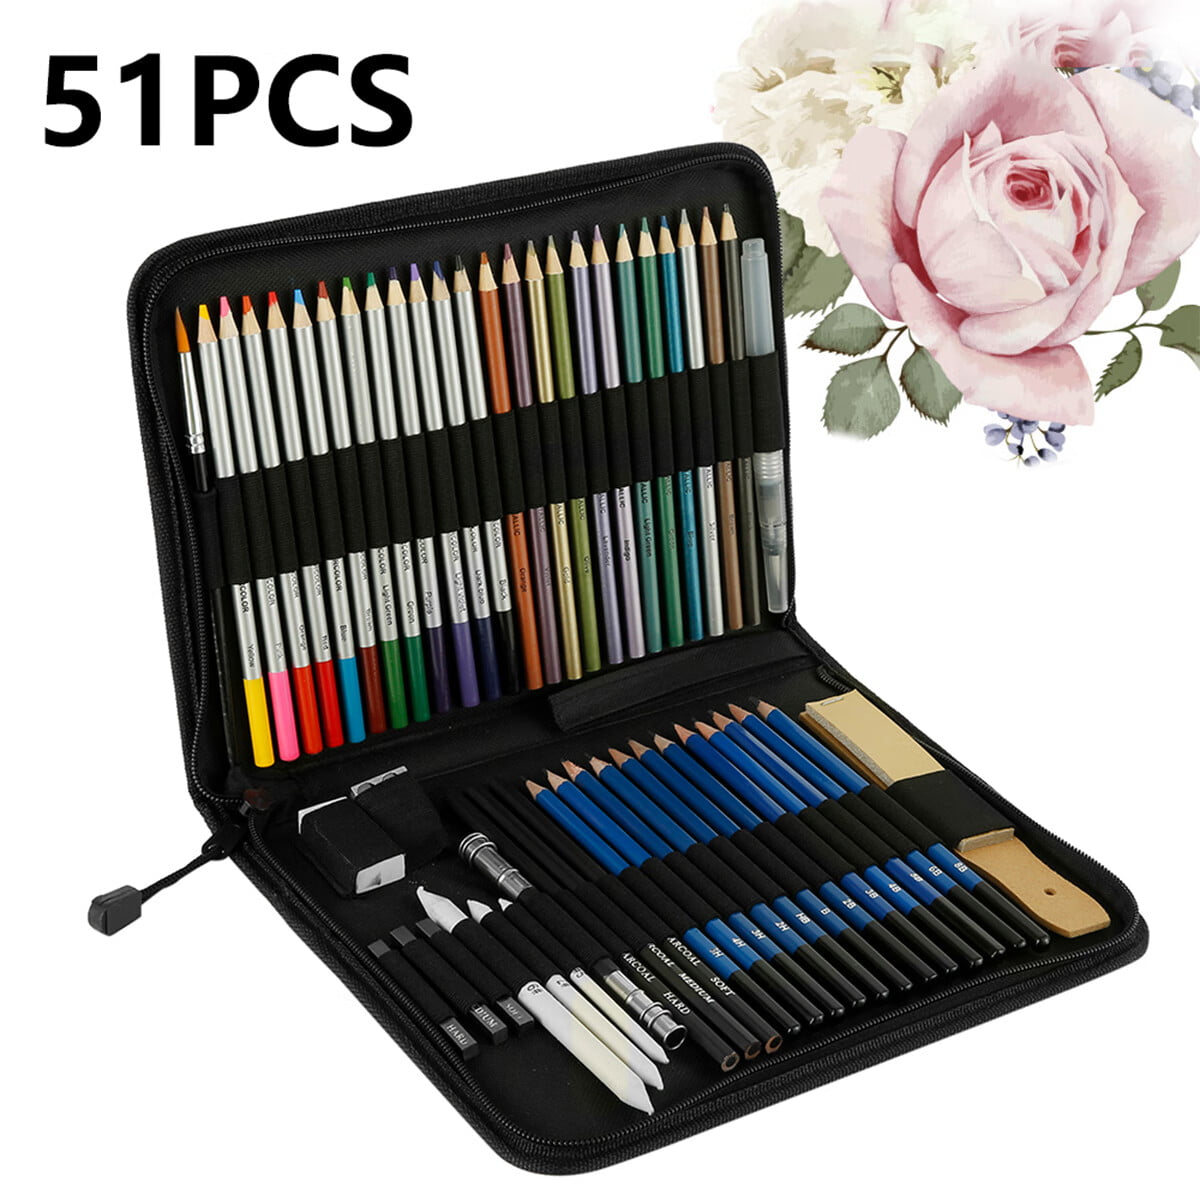 Buy Depesche Colored pencils for drawing Products in the UAE, Cheap Prices  & Shipping to Dubai